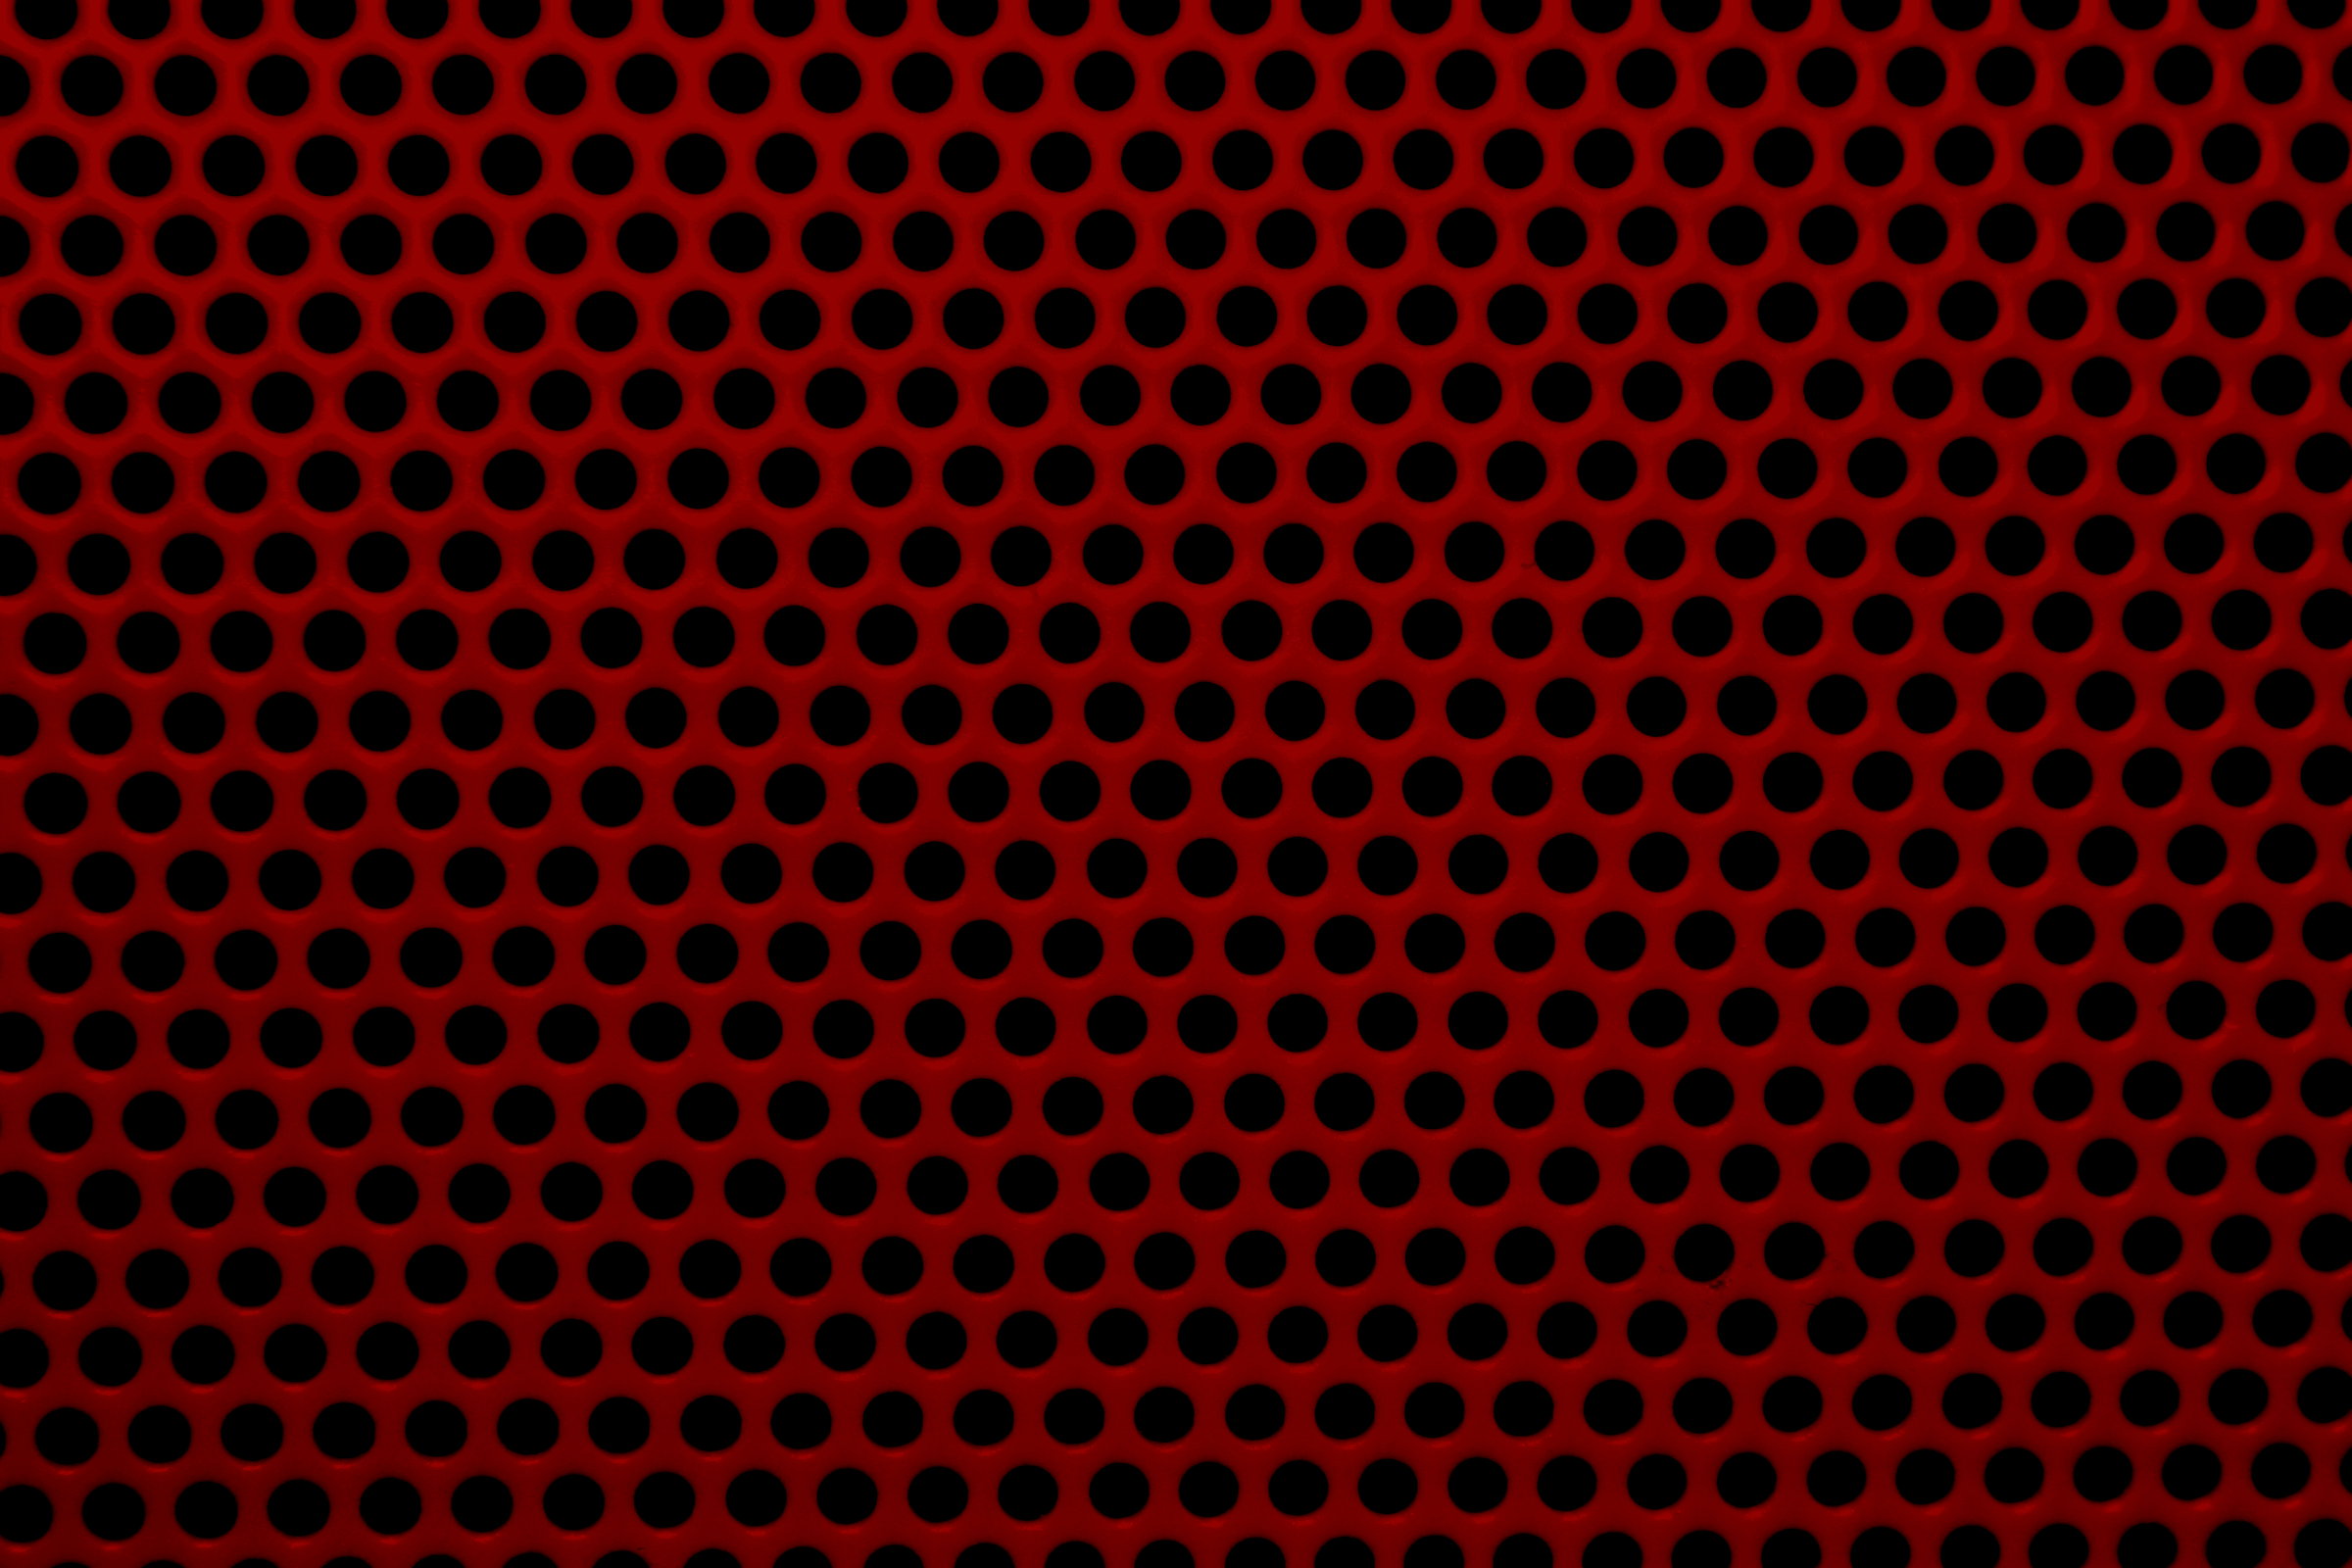 Red Mesh with Round Holes Texture Picture | Free Photograph | Photos ...